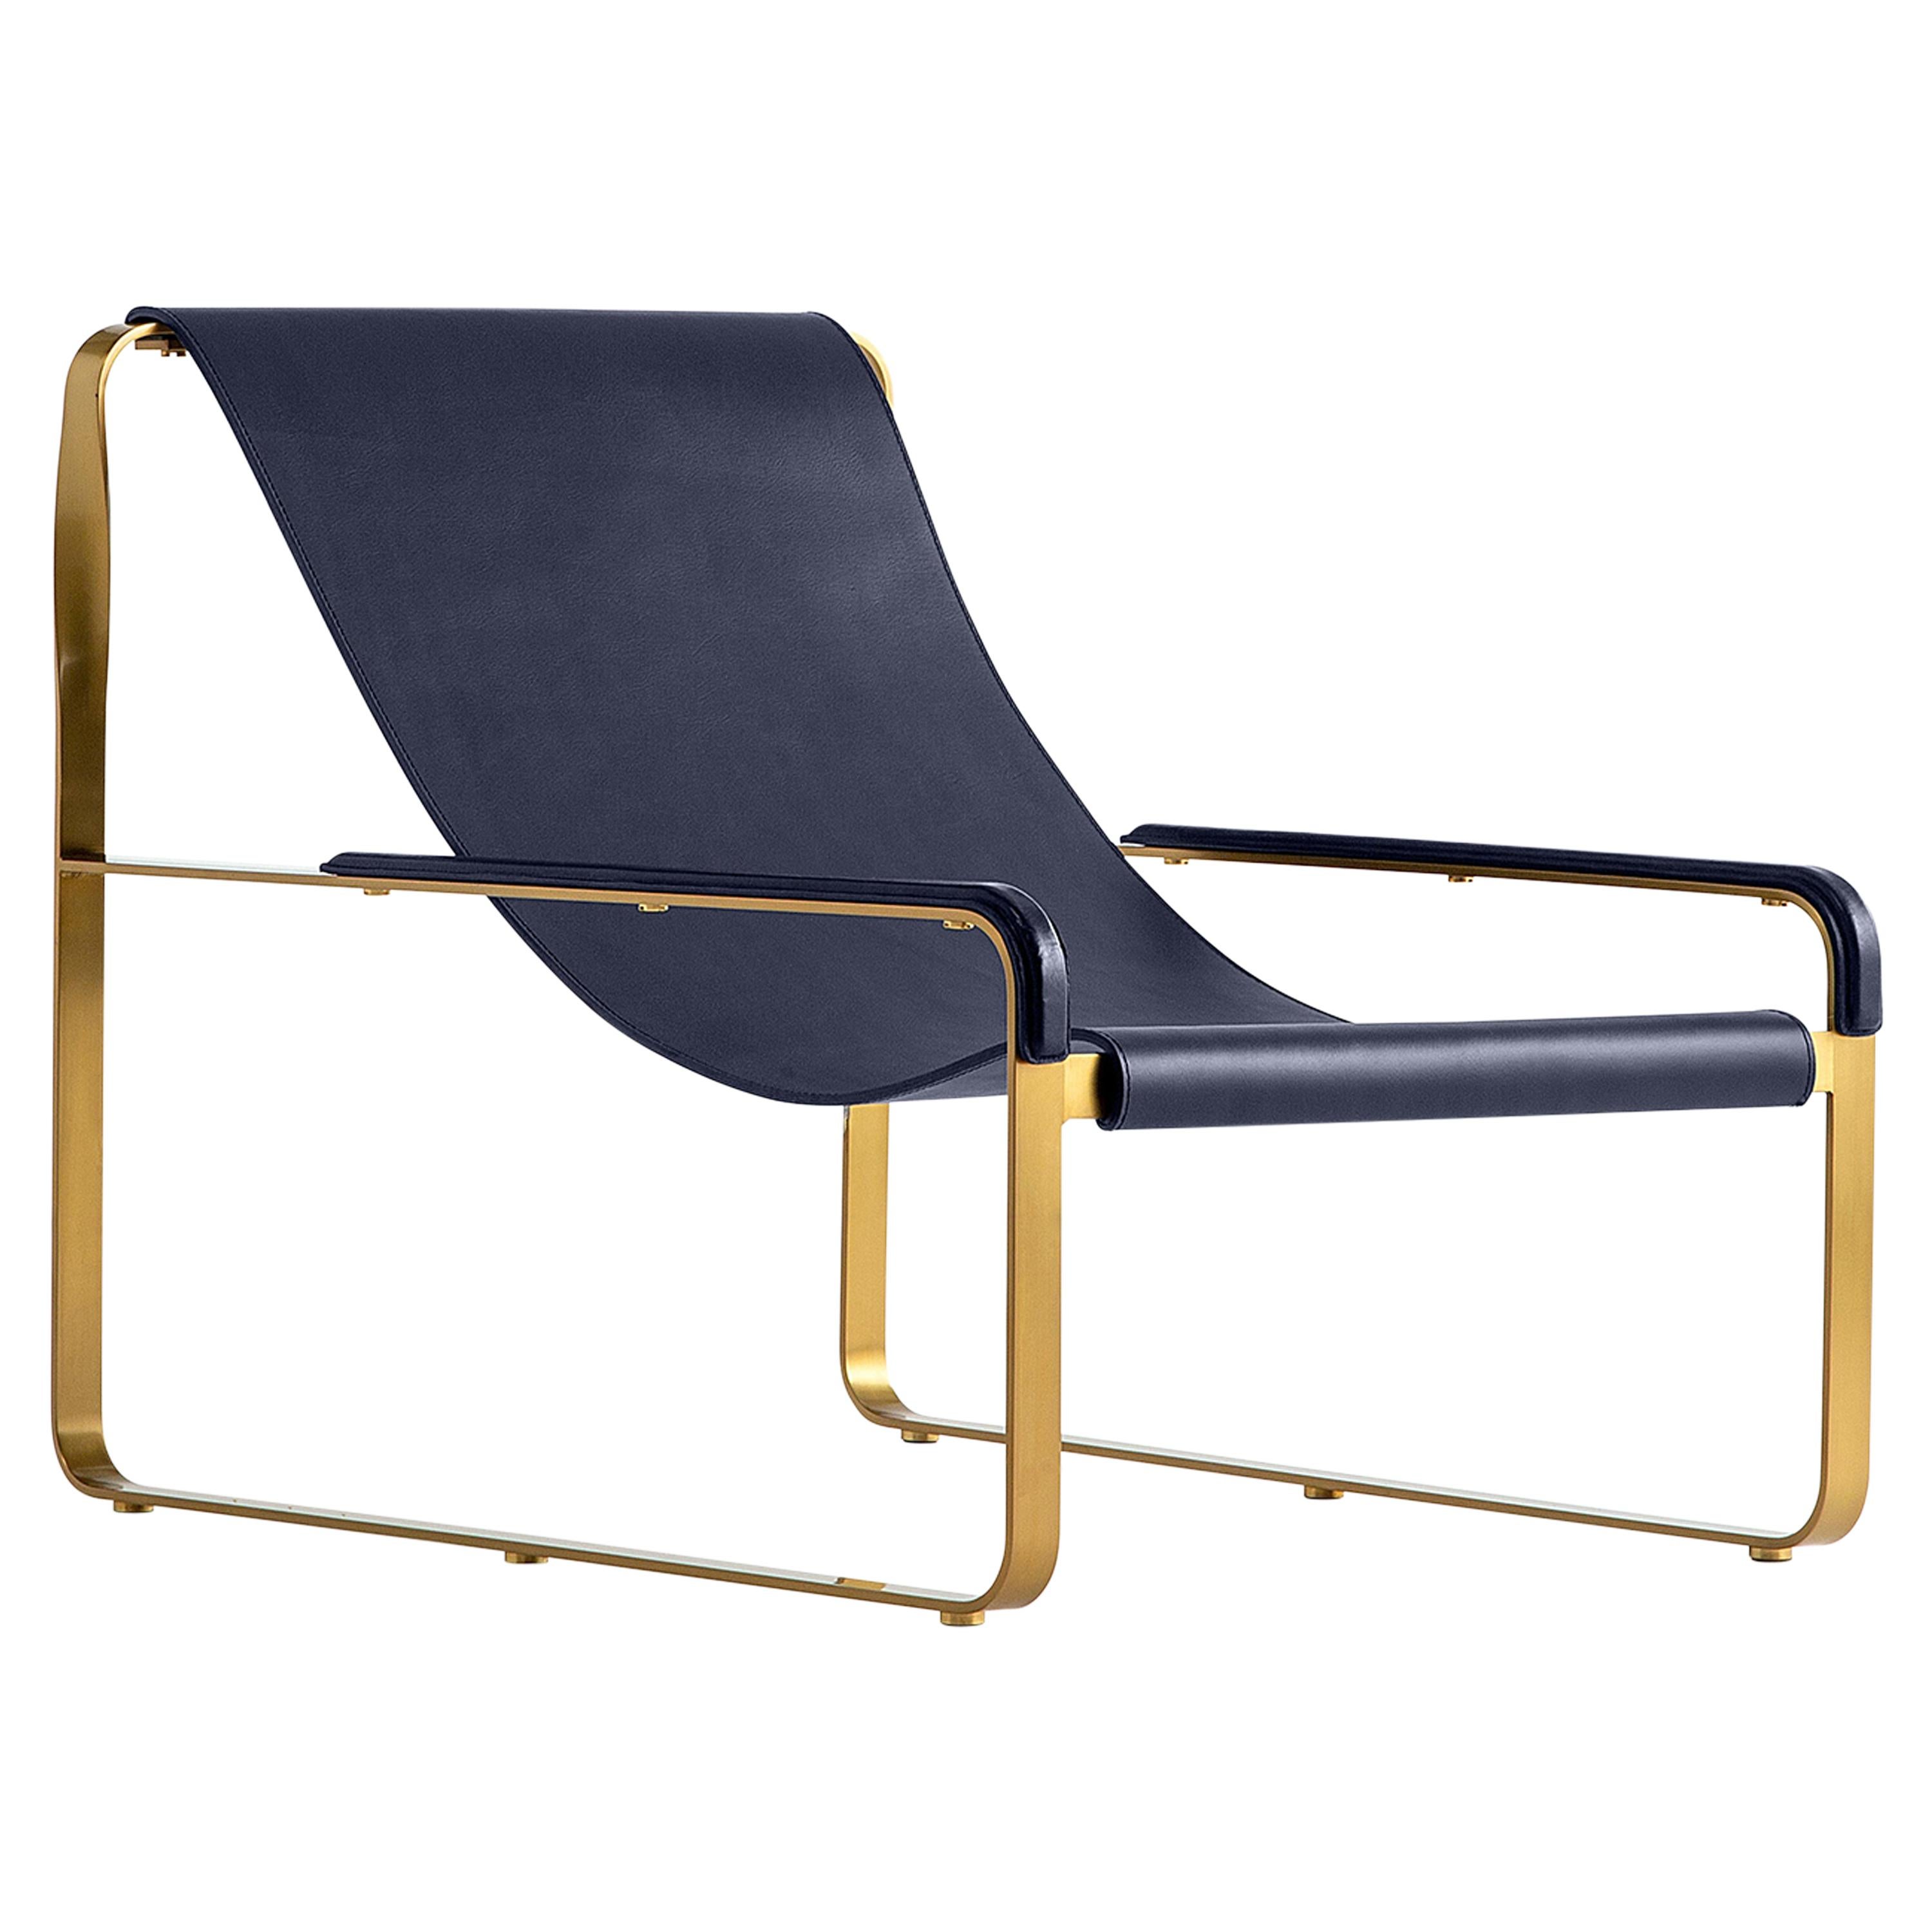 Classic Contemporary Chaise Lounge Altmessing Stahl & Marineblaues Leder